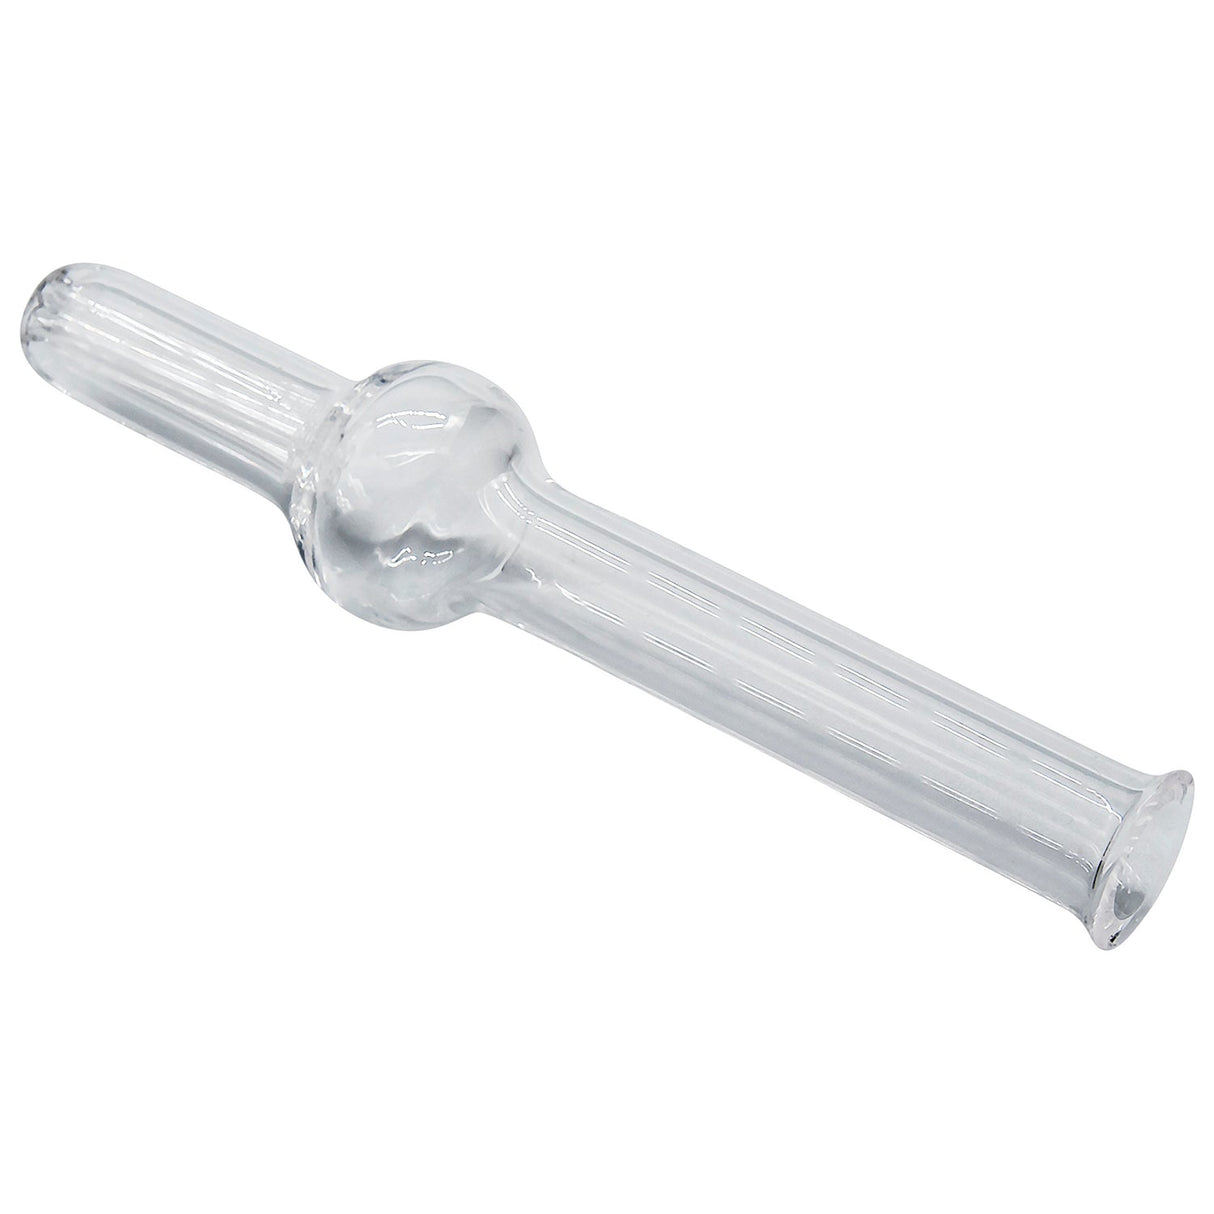 Rupert's Drop Solid Quartz Concentrate Vapor Straw - Clear, 4.5" Length, Angled View